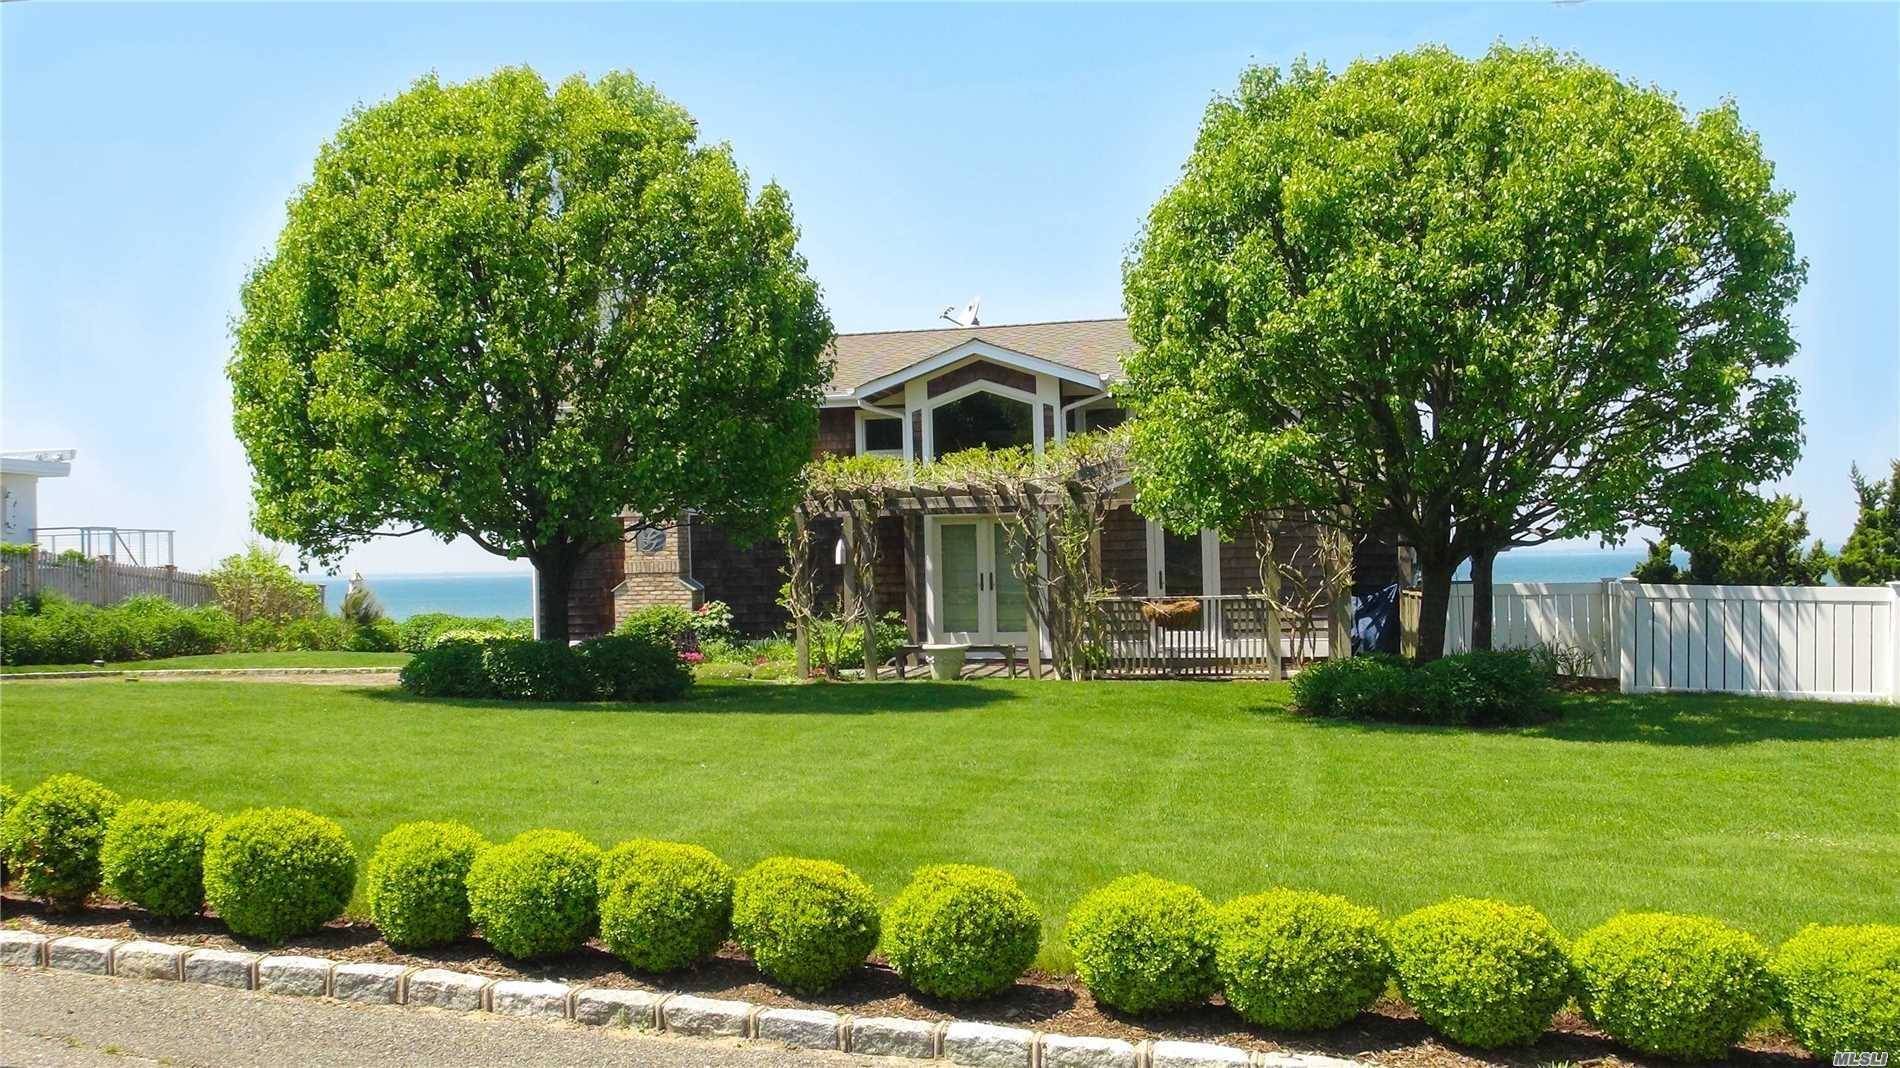 The ultimate summer getaway located beachfront on the Great Peconic Bay.